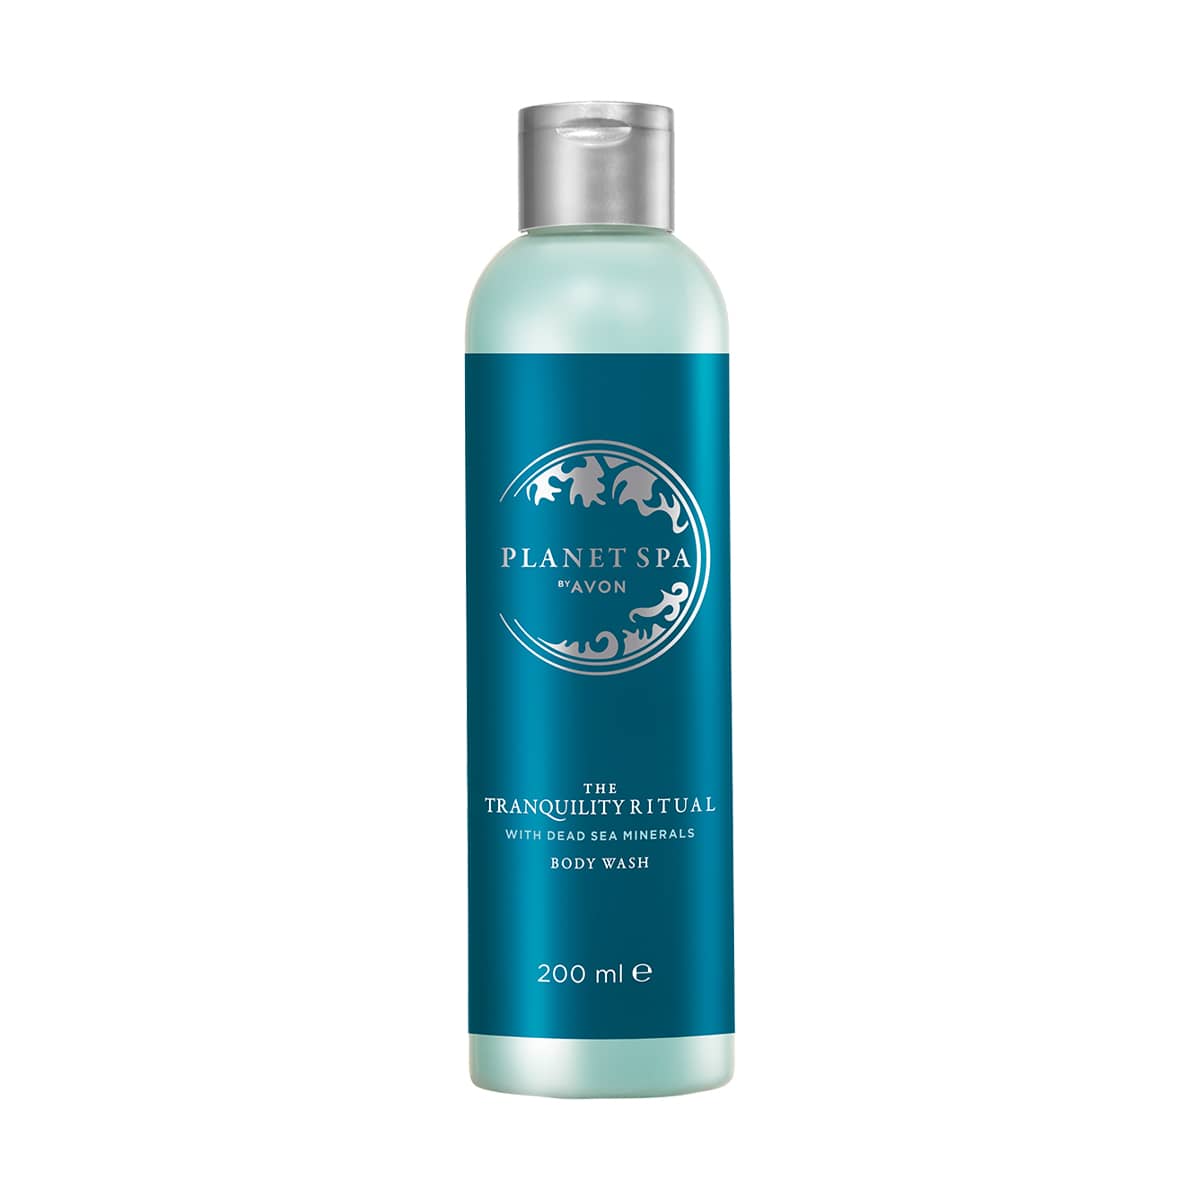 Planet Spa The Tranquility Ritual Body Wash 200ml